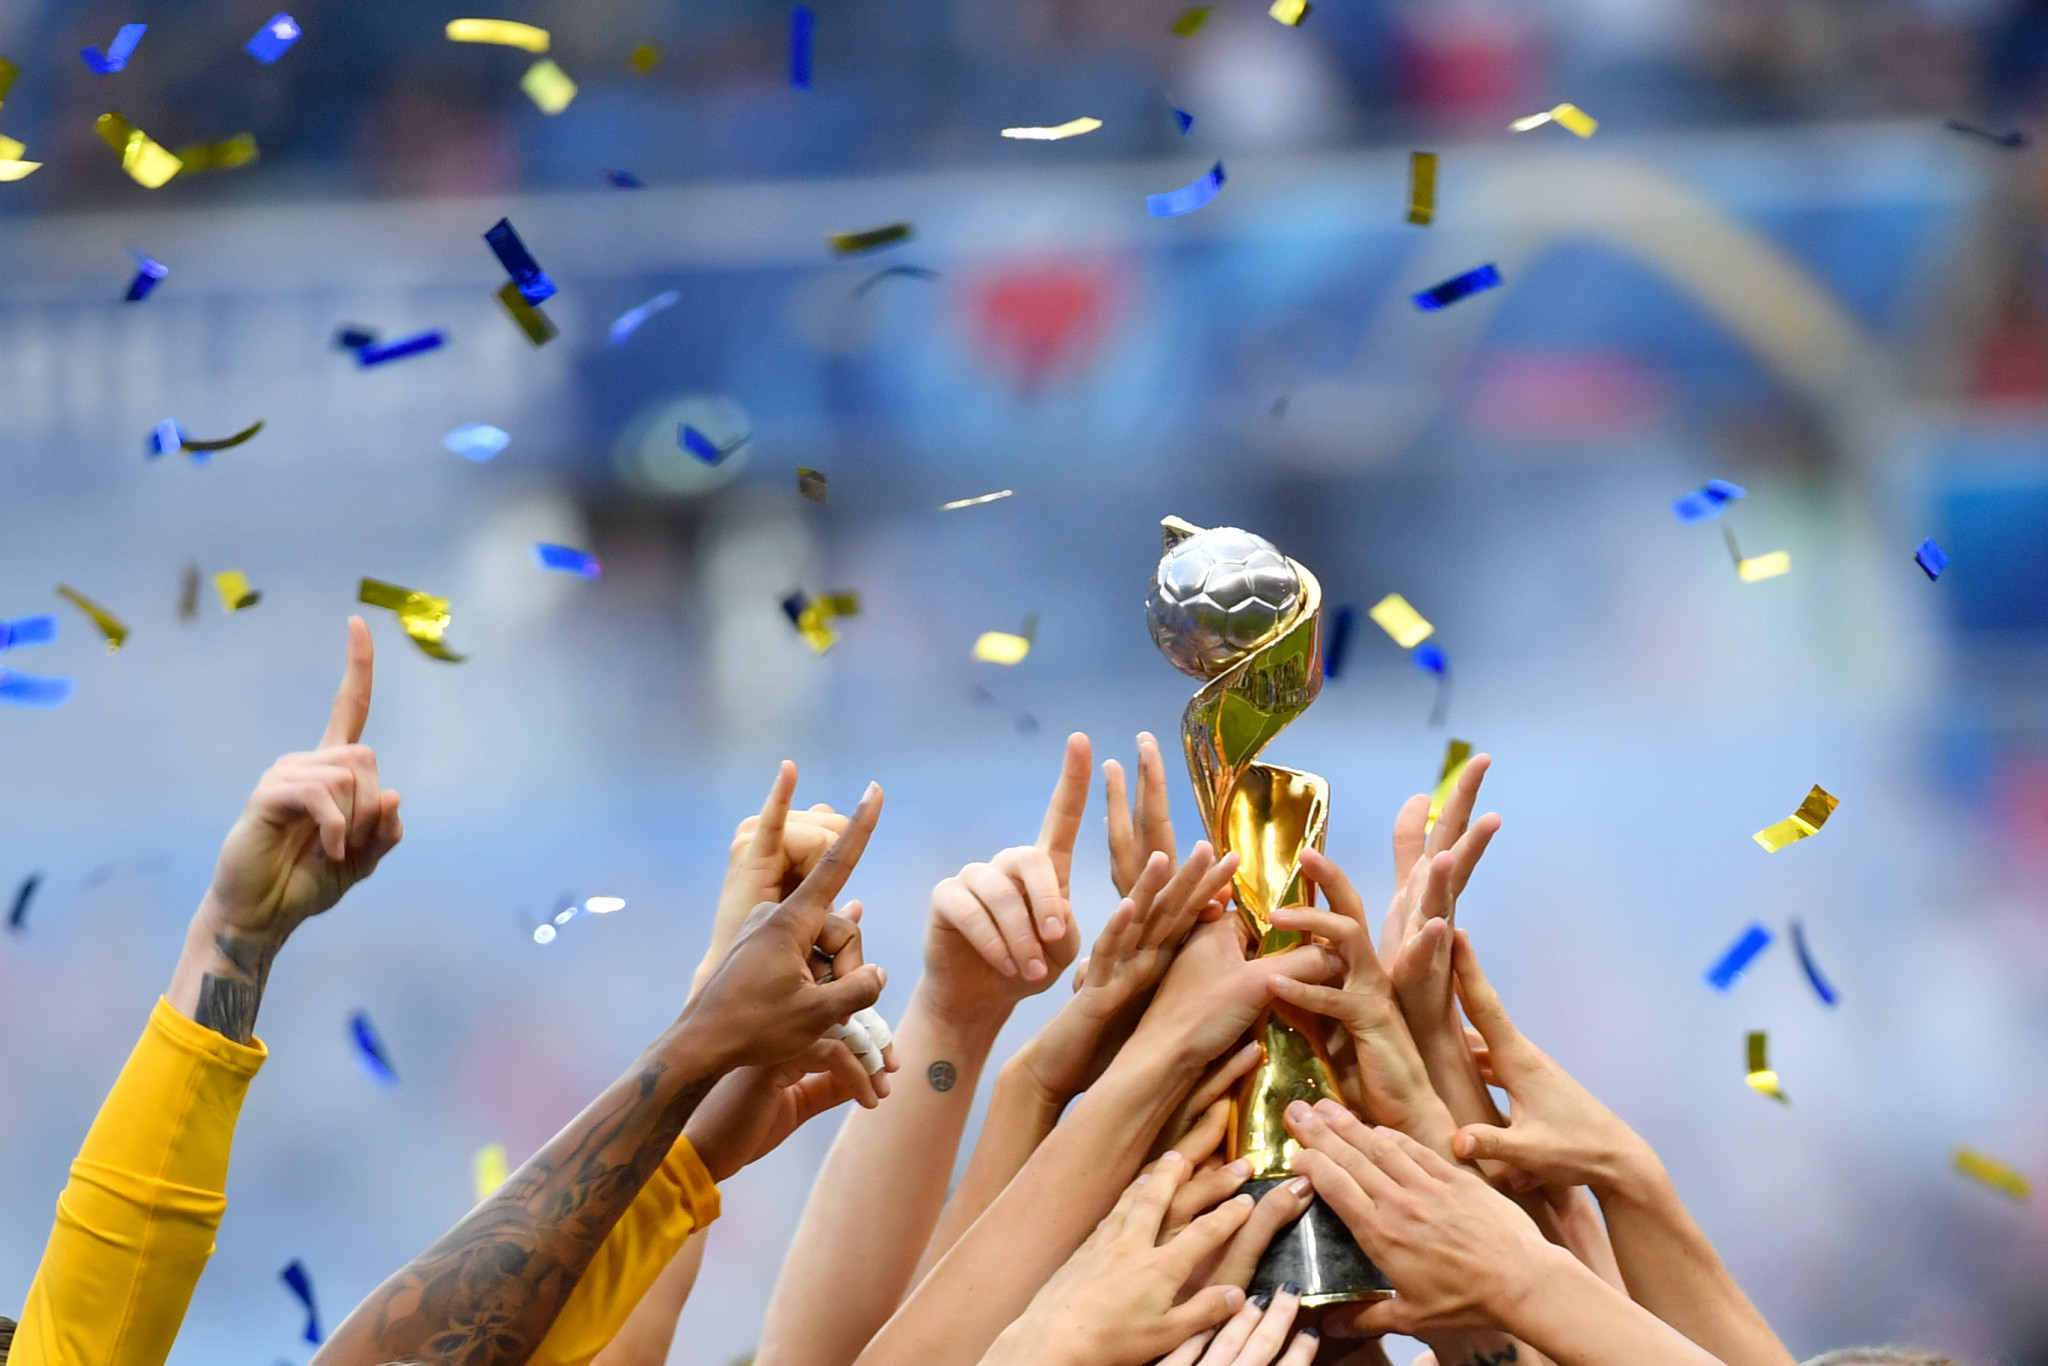 Inter Rapidísimo has been named as an official supporter of the 2023 FIFA Women's World Cup in Australia and New Zealand ©Getty Images